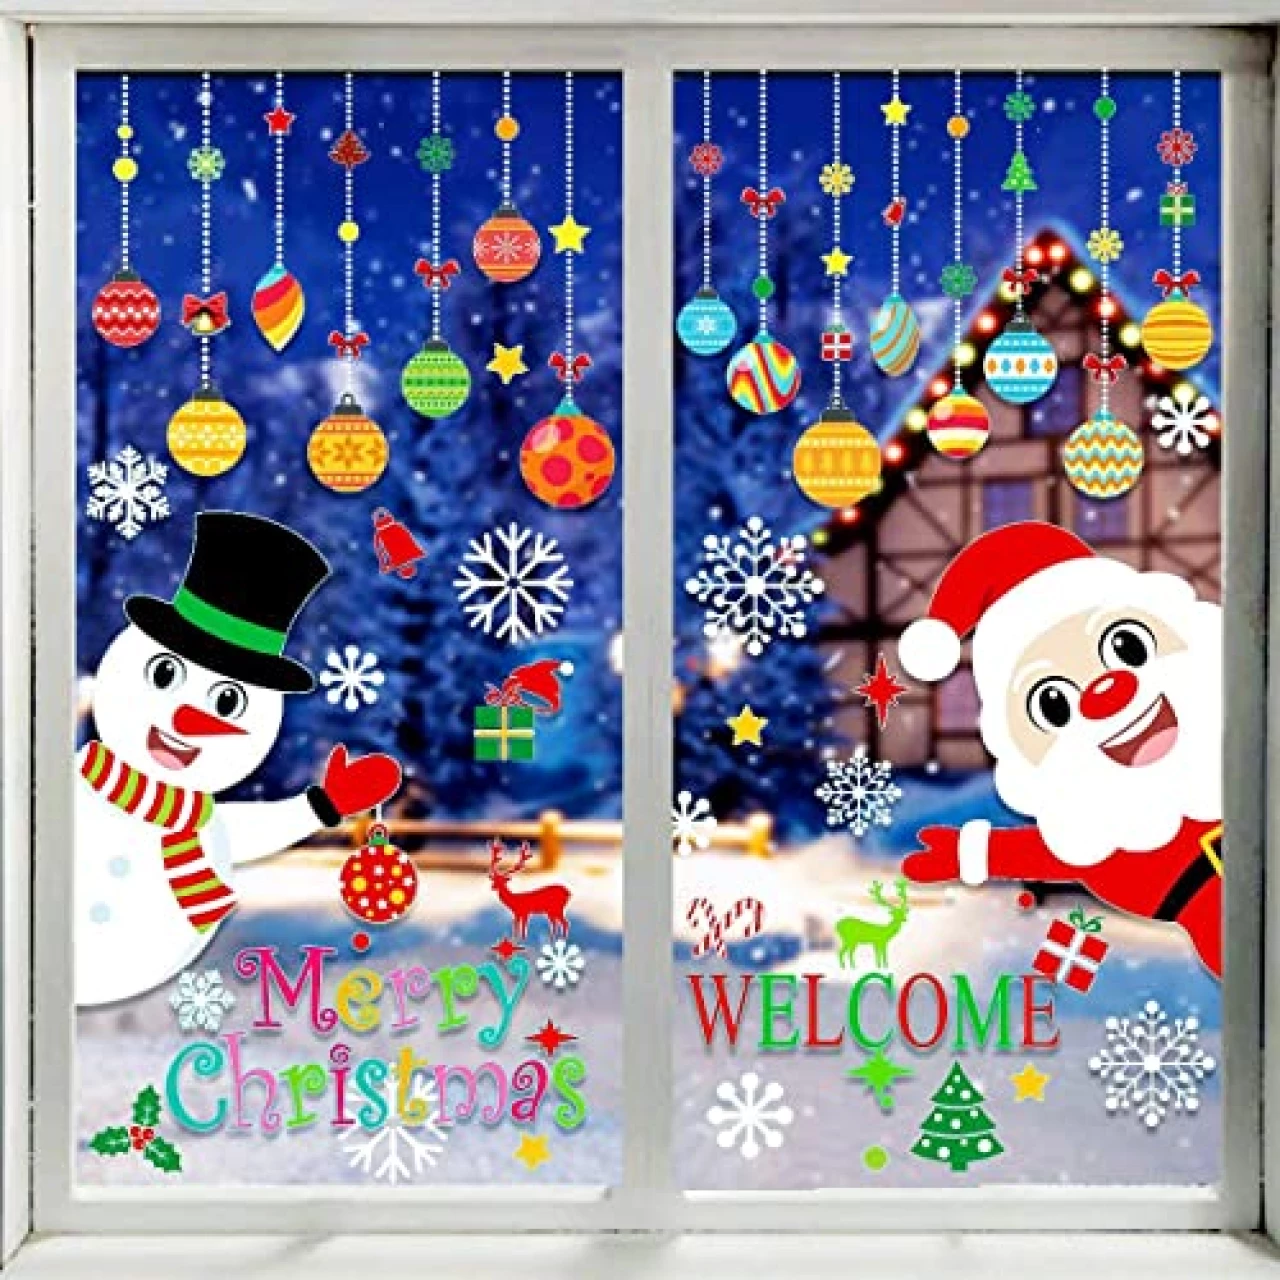 150 PCS Christmas Window Clings Santa Claus Snowman Decals for Christmas Party Decorations